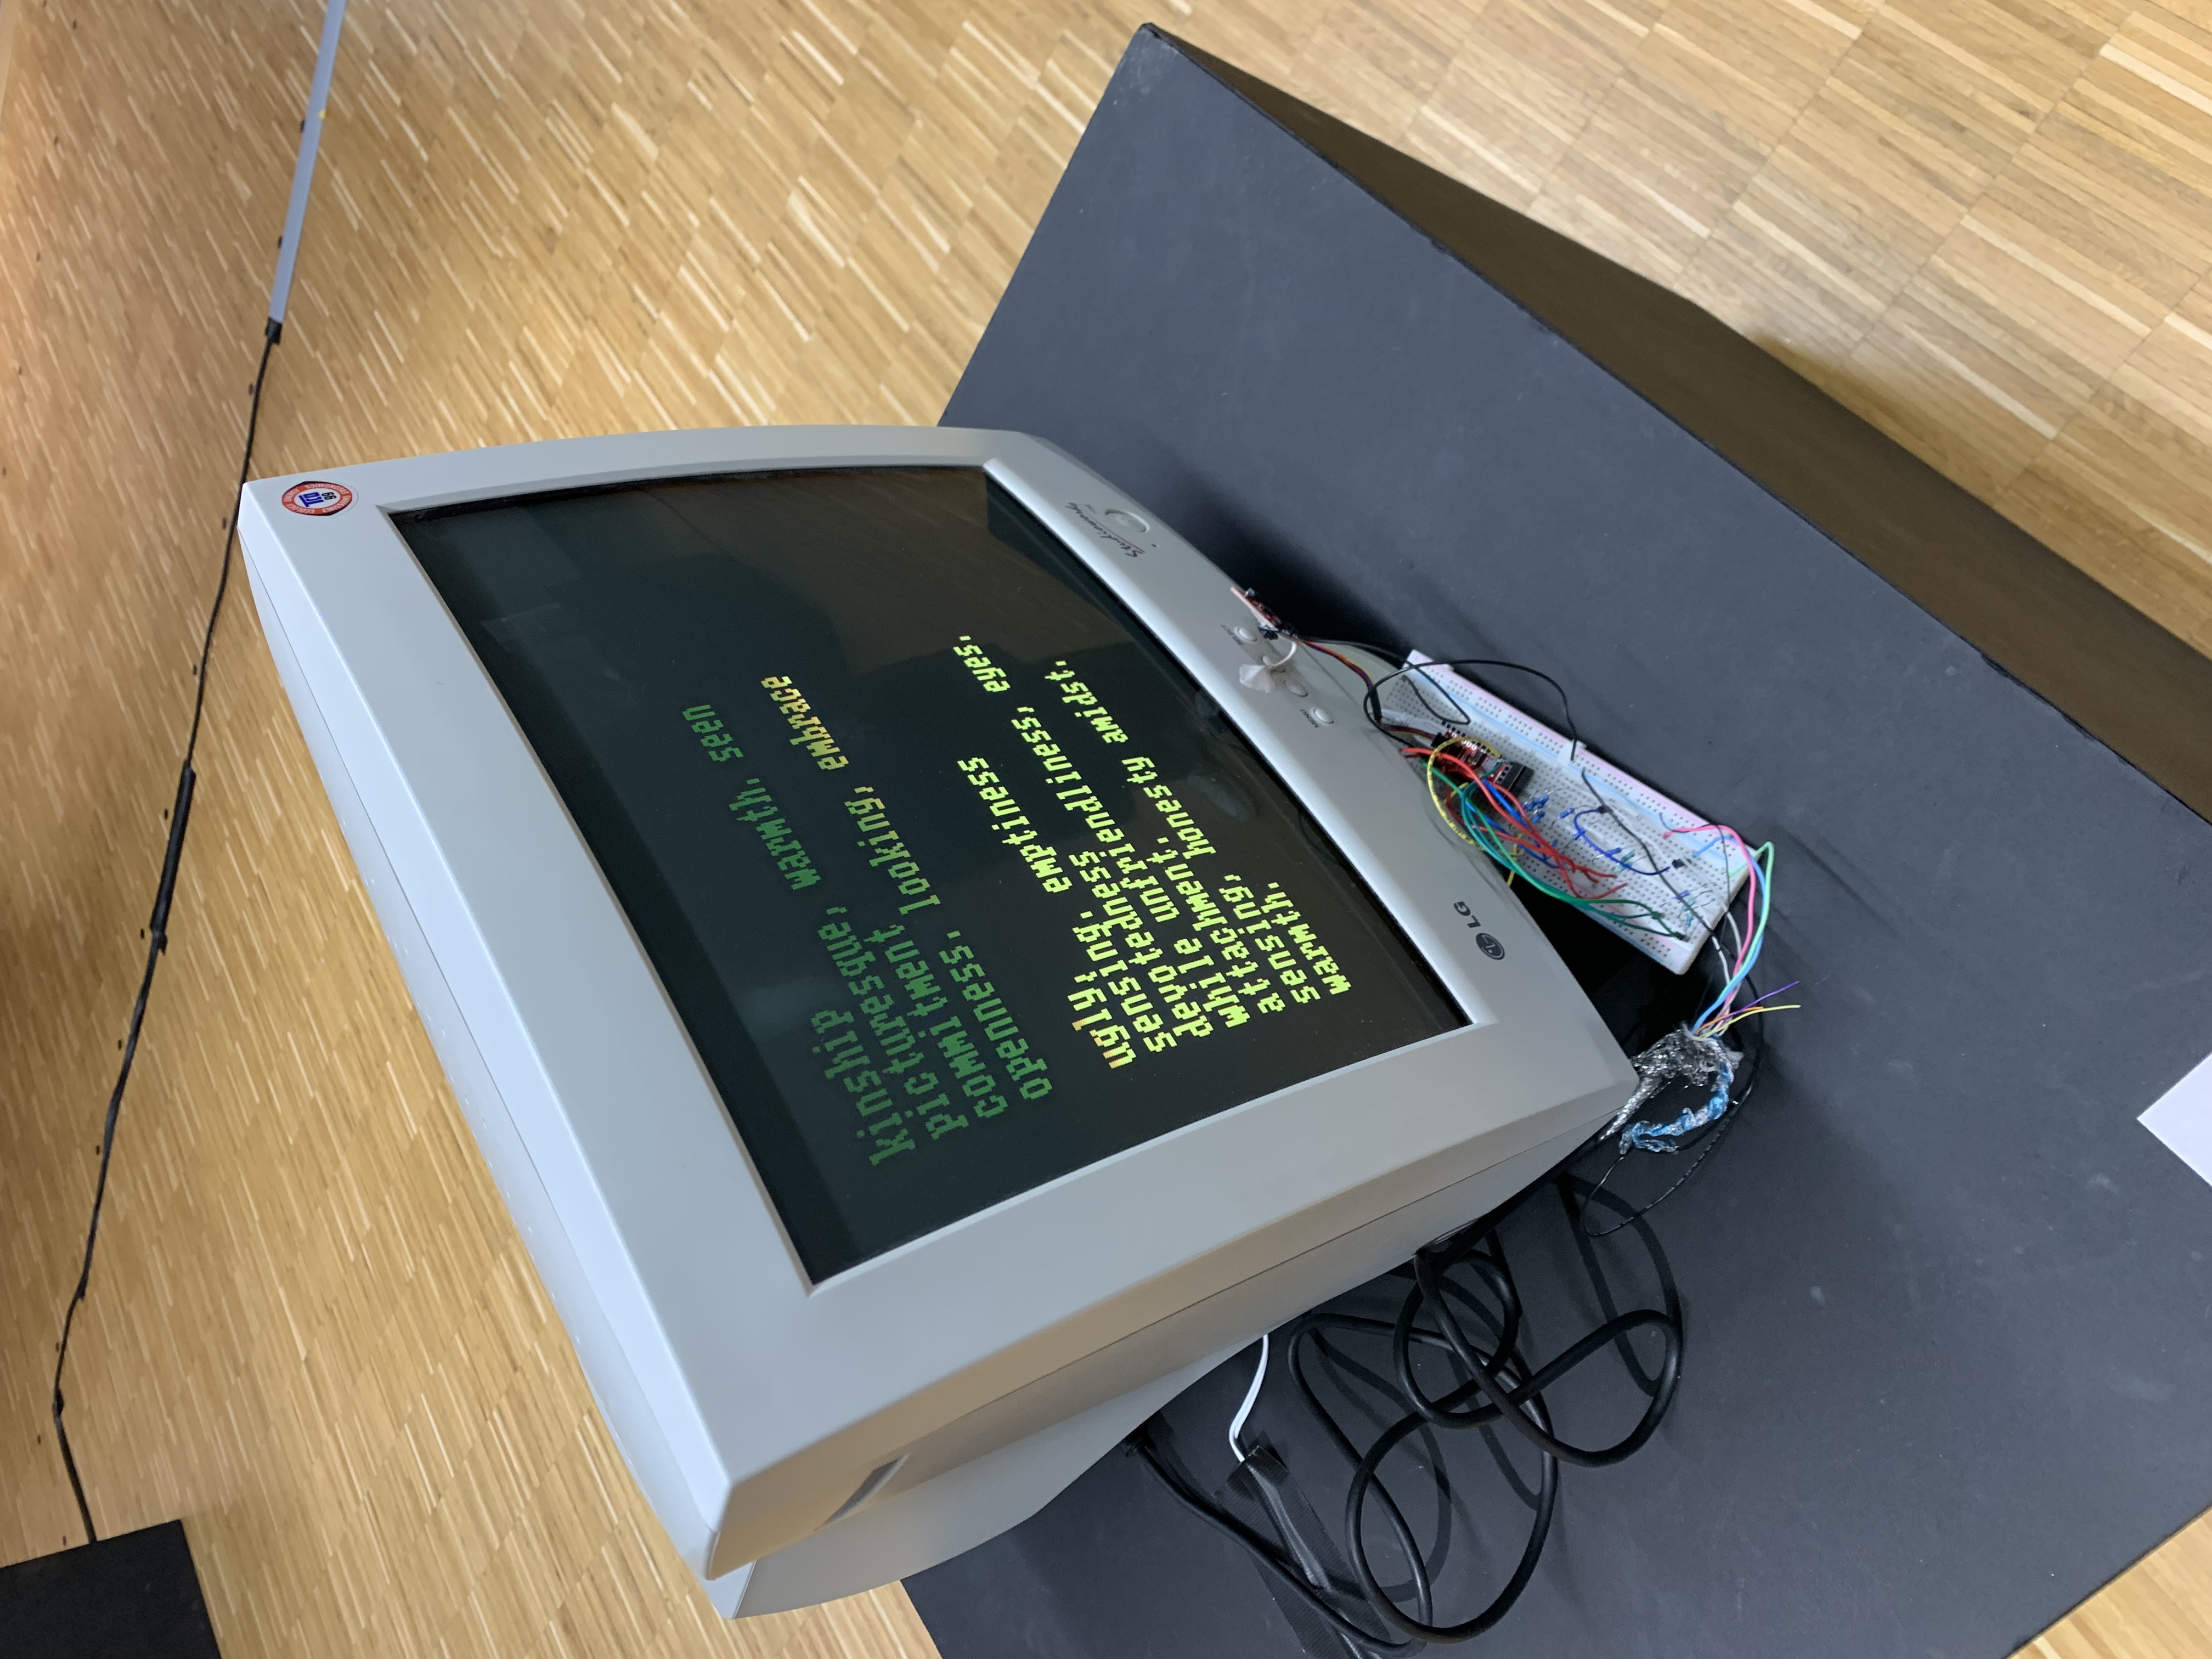 A picture of the work, showing a poem on a CRT display